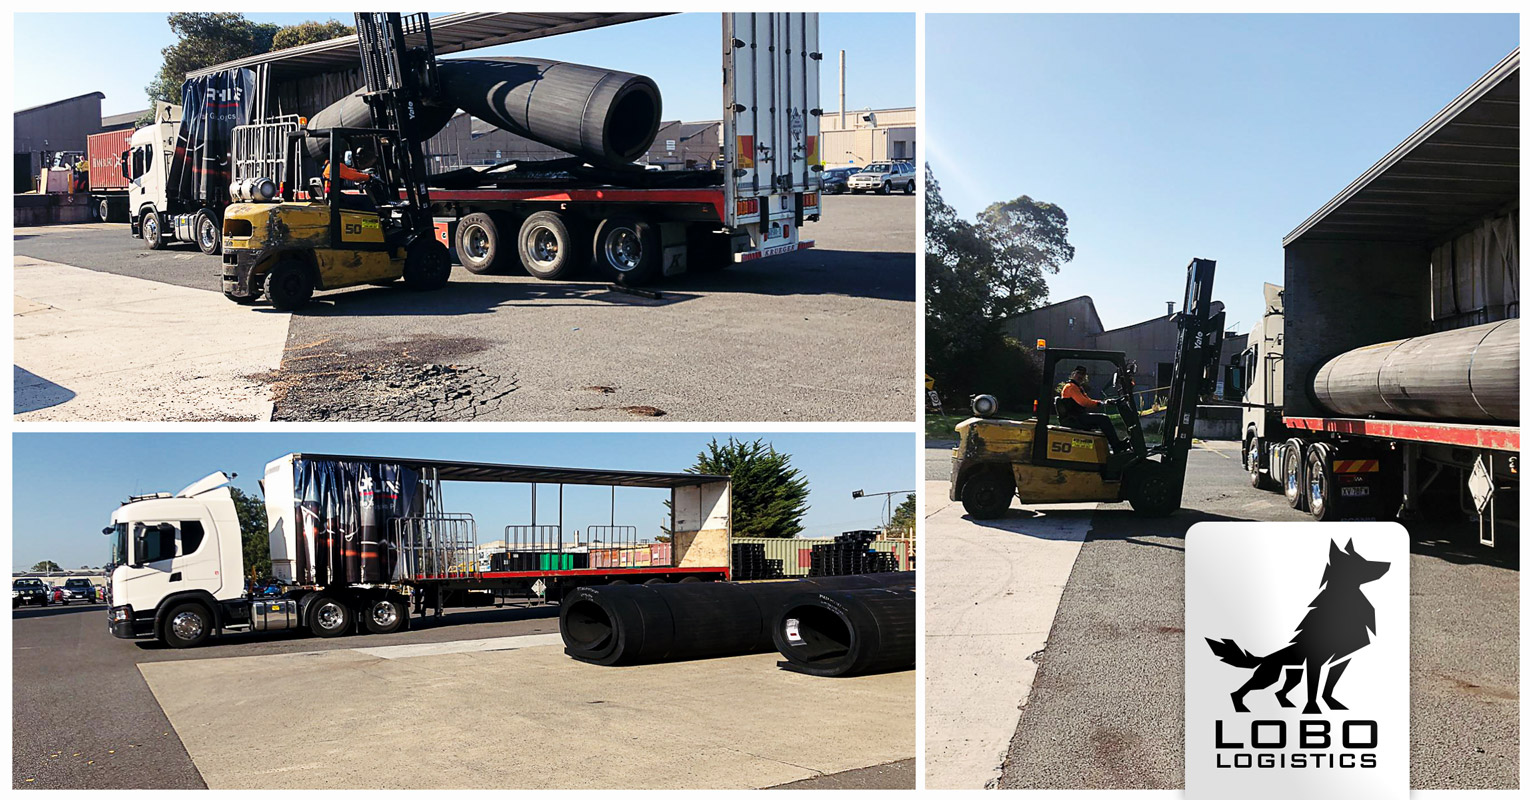 Lobo Logistics Transported these 7 Meter Long Rolls 3,451 km ex Melbourne to Western Australia